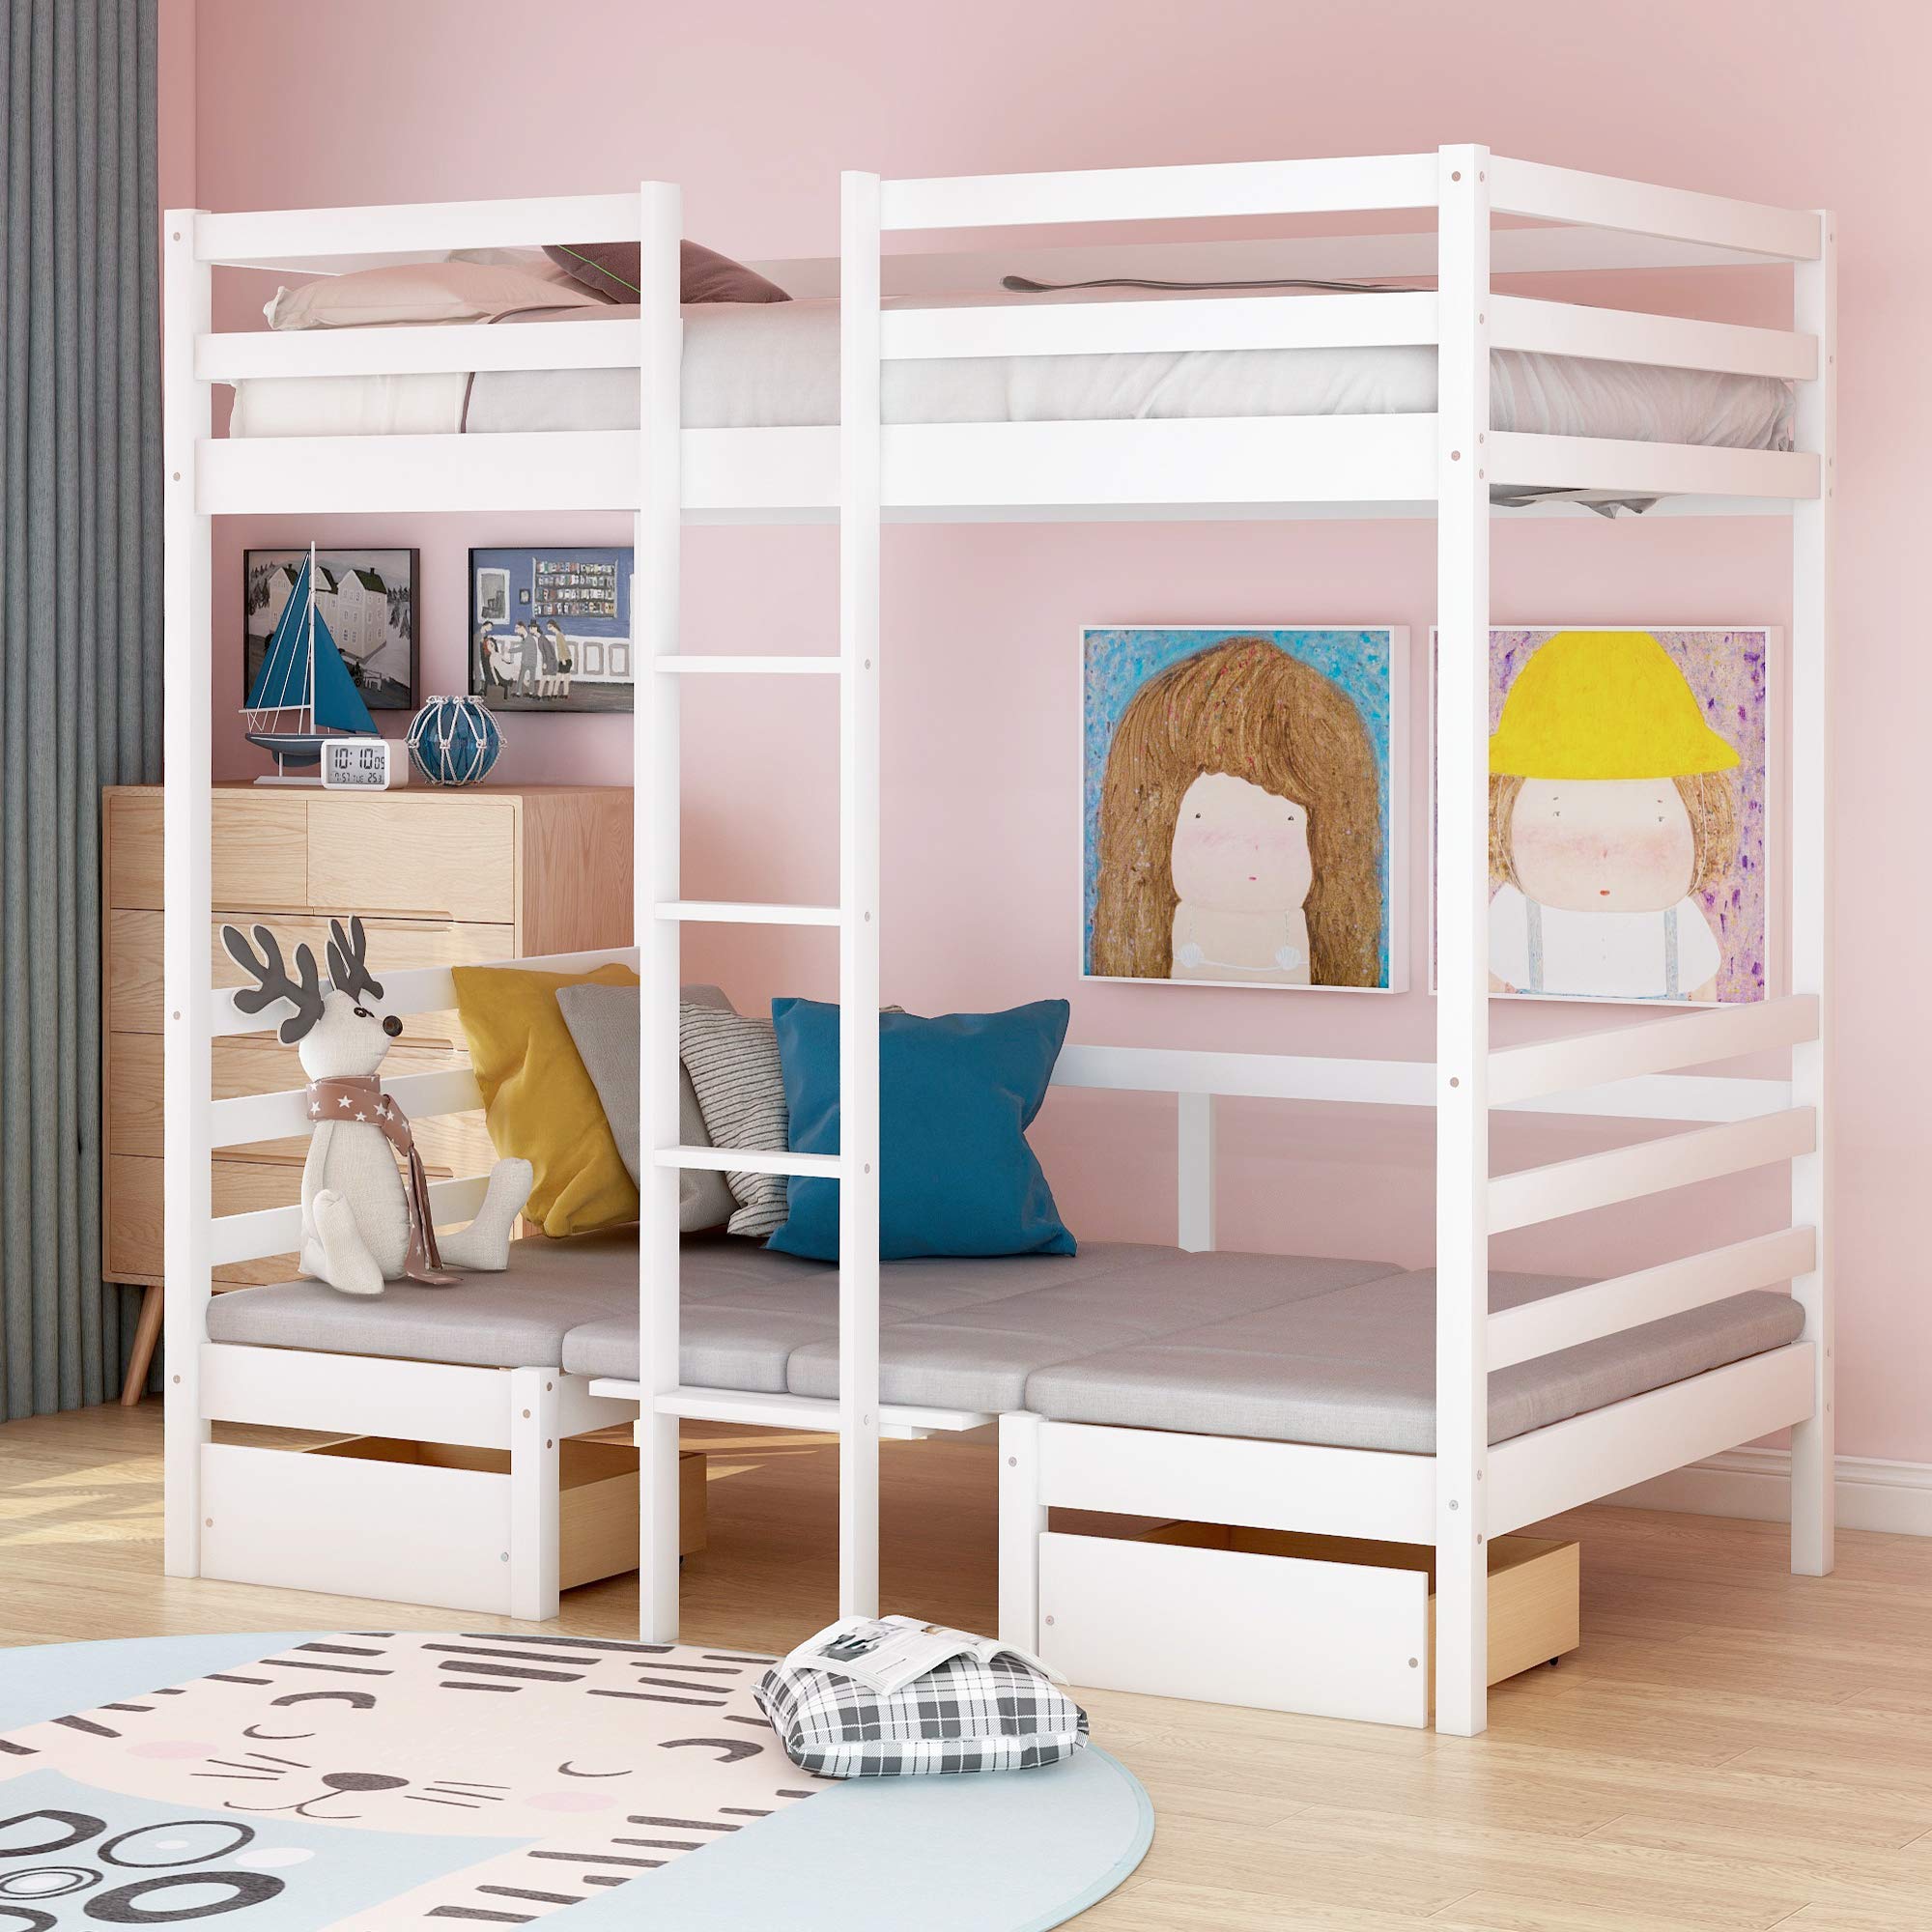 Softsea Twin Over Twin Bunk Bed With Storage Drawers And Desk, Loft Bed With Table And Cushion Seat, Multifunctional Bed